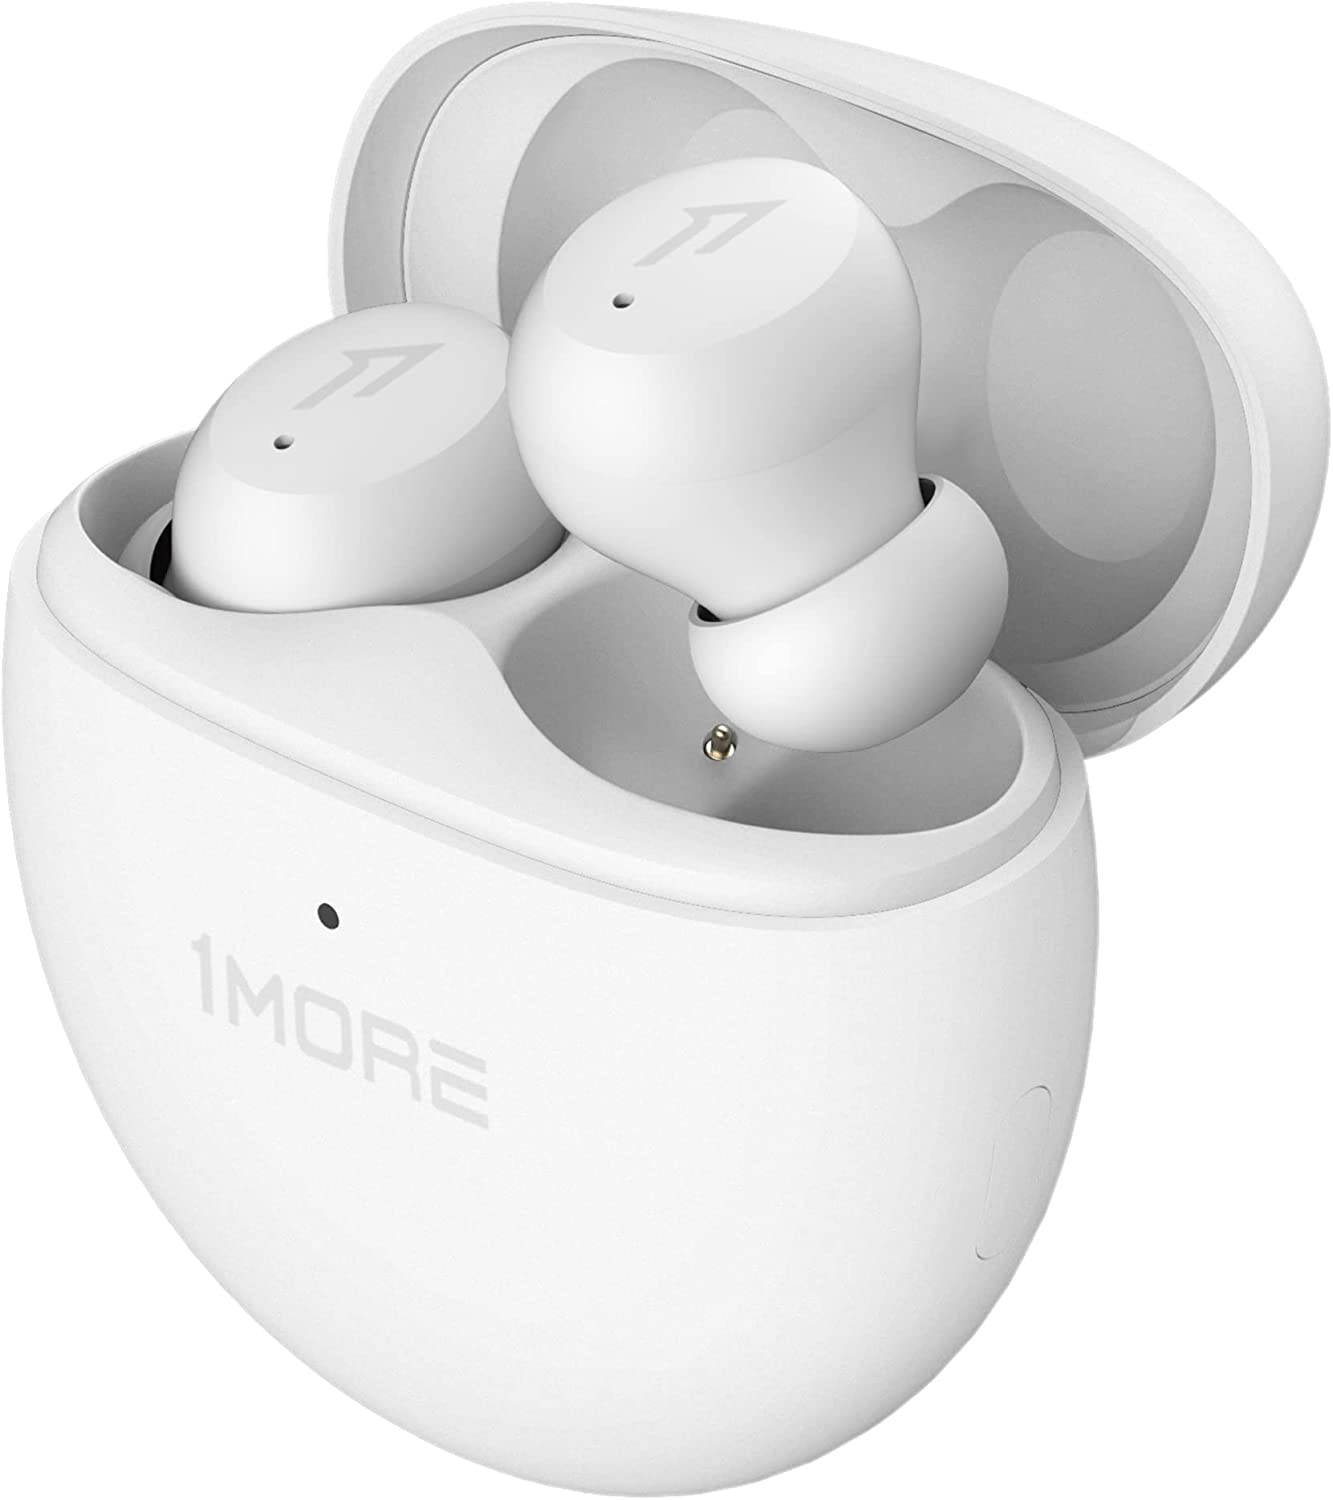 1MORE ComfoBuds Mini Hybrid Active Noise Cancelling Earbuds, In-Ear Headphones with Stereo Sound, Bluetooth 5.2 Headset with 4 Mics, Clear Calls, Wireless Charging, Soothing Sound, Waterproof, White